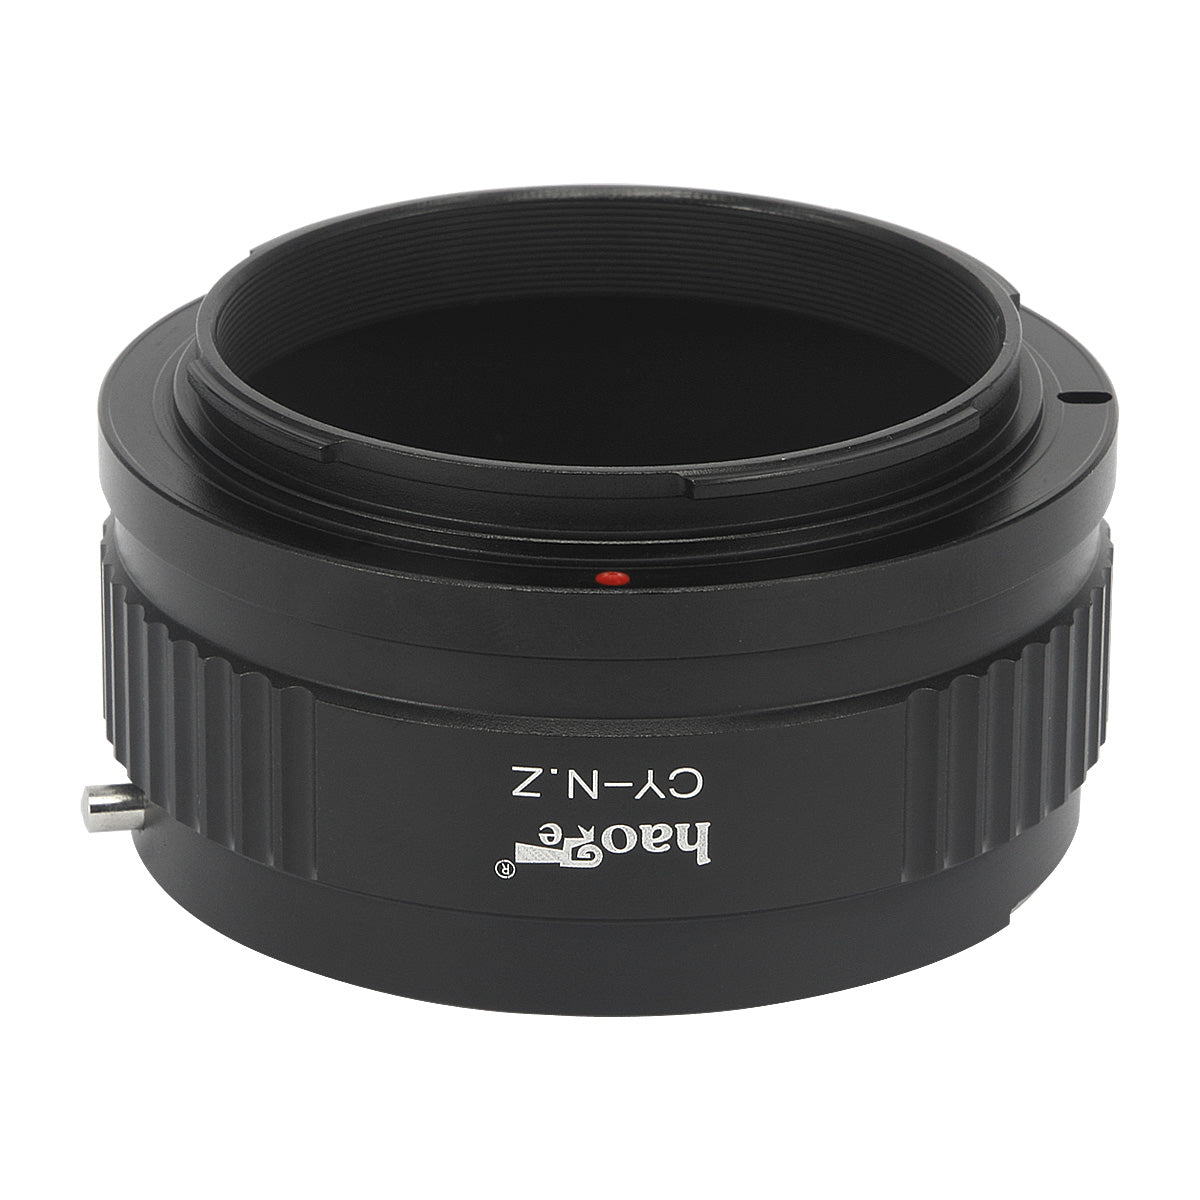 Haoge Manual Lens Mount Adapter for Contax / Yashica C/Y CY mount Lens to Nikon Z Mount Camera Such as Z6 Z7